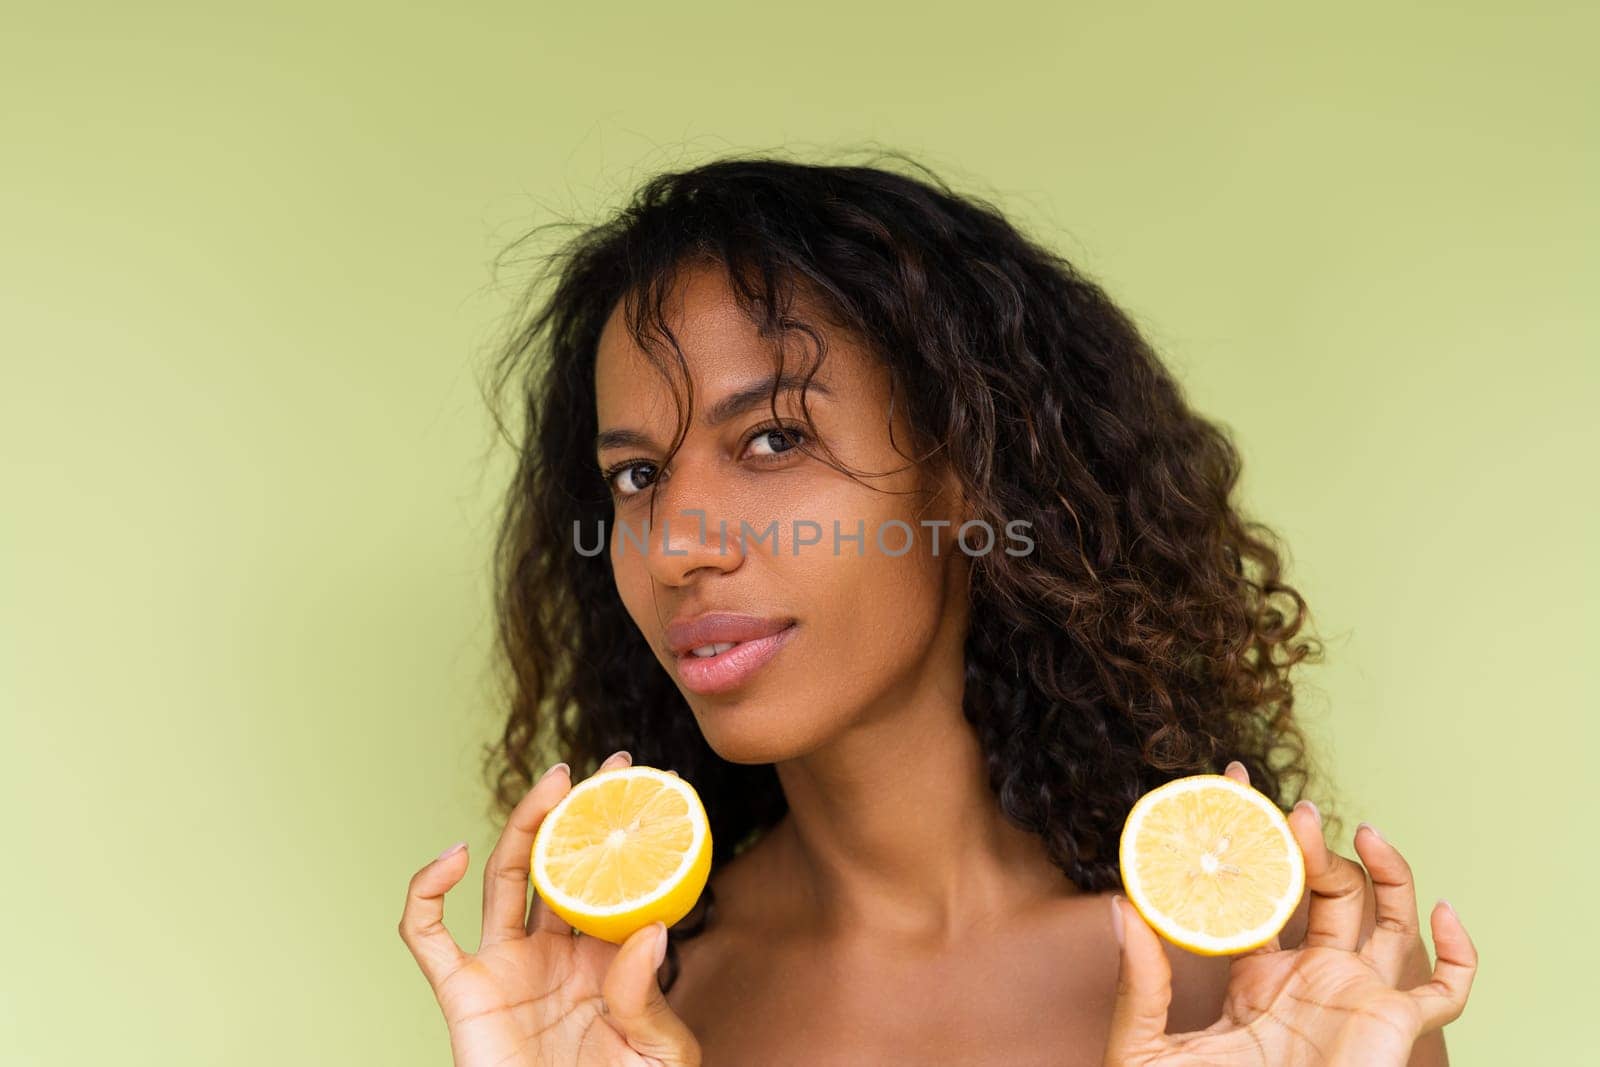 Beauty portrait of young topless woman with bare shoulders on green background with perfect skin and natural makeup holds citrus lemons by kroshka_nastya